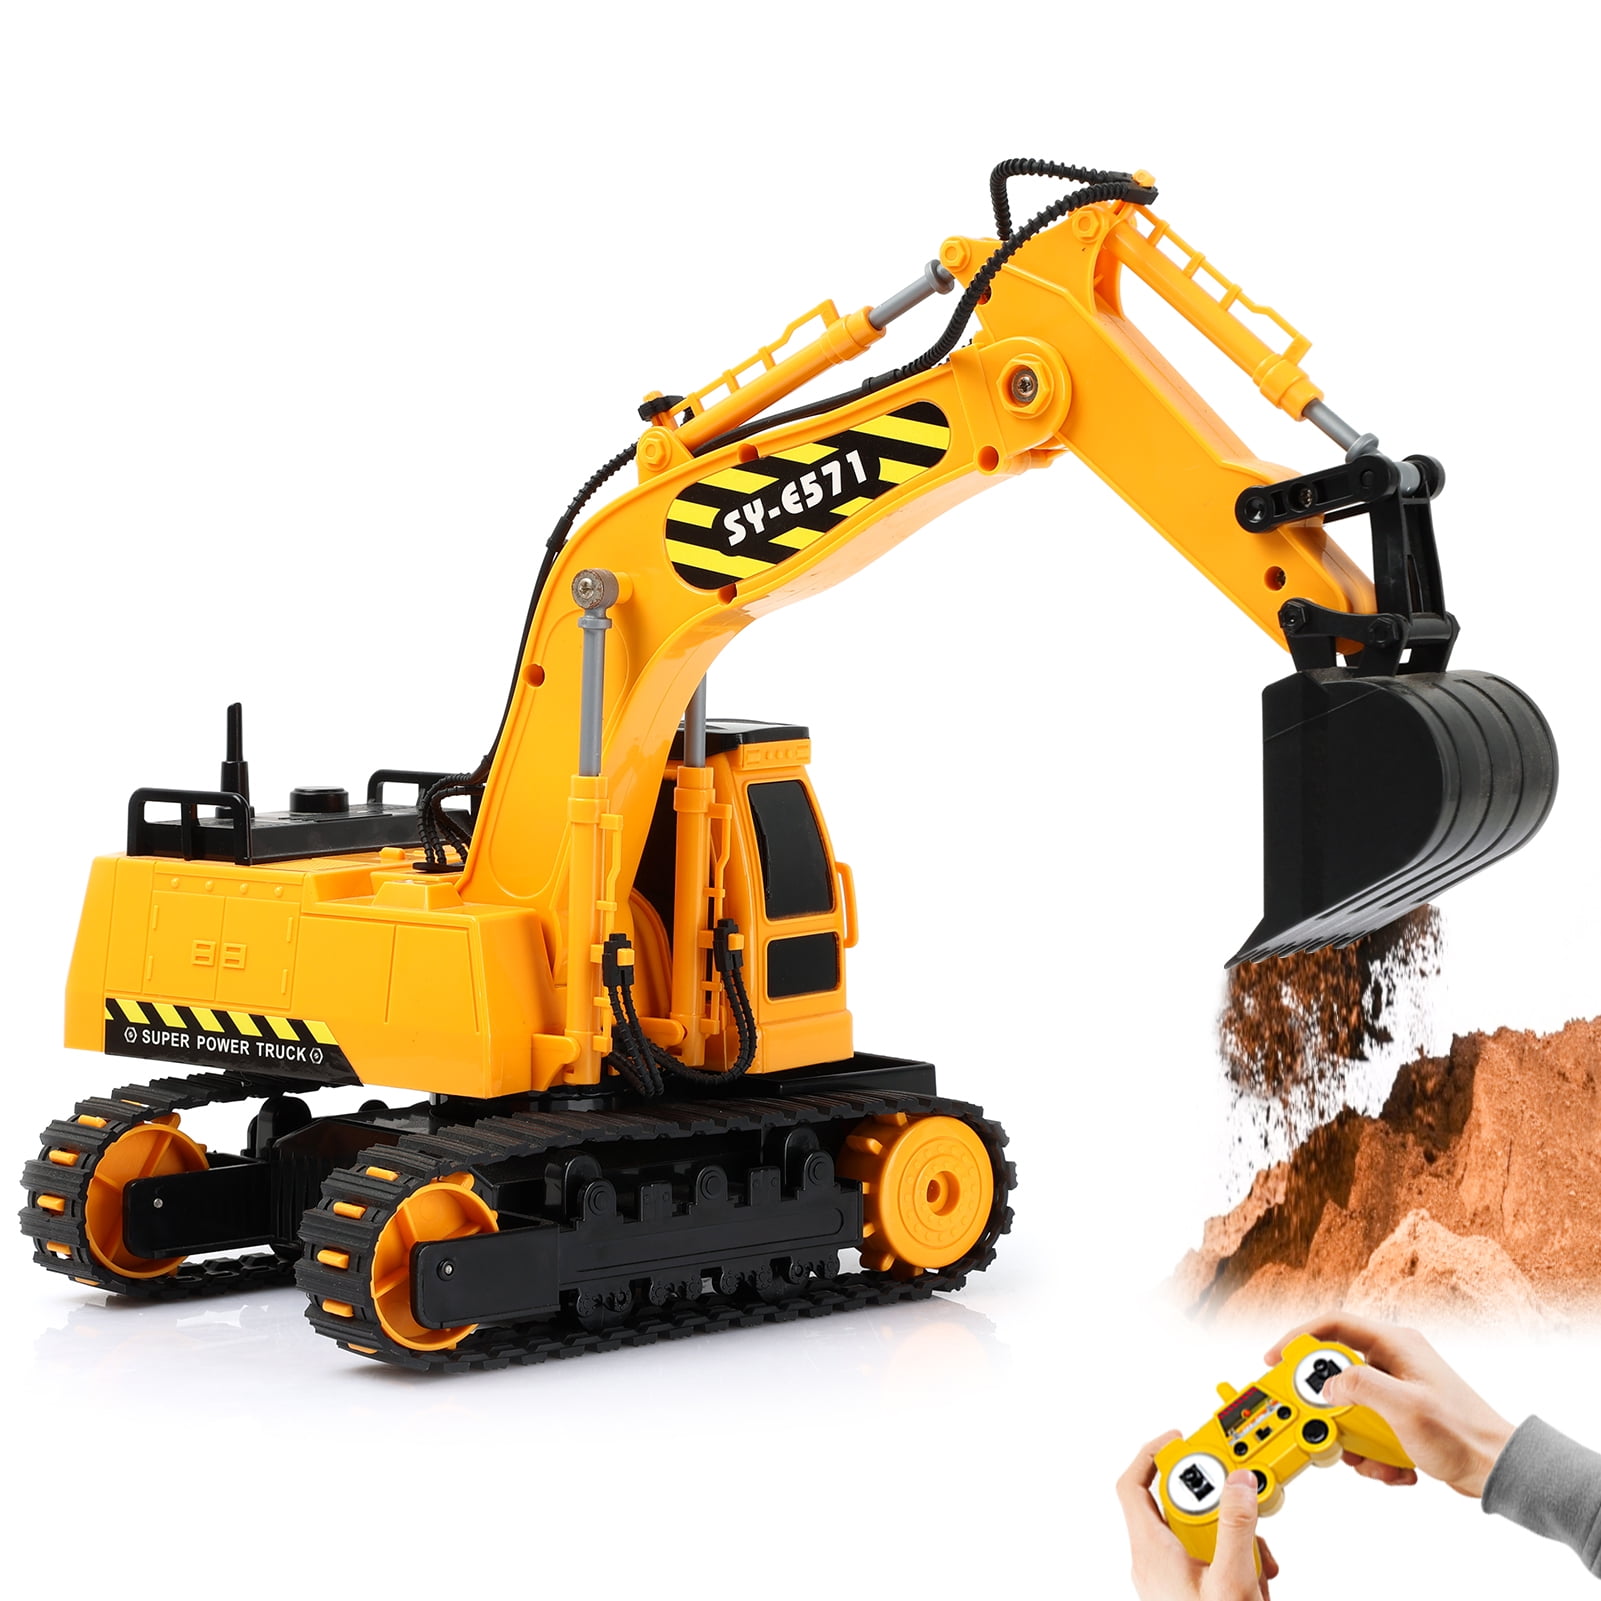 Buy Gili Excavator Toy Truck for 4-8 Online at Lowest Price in India ...